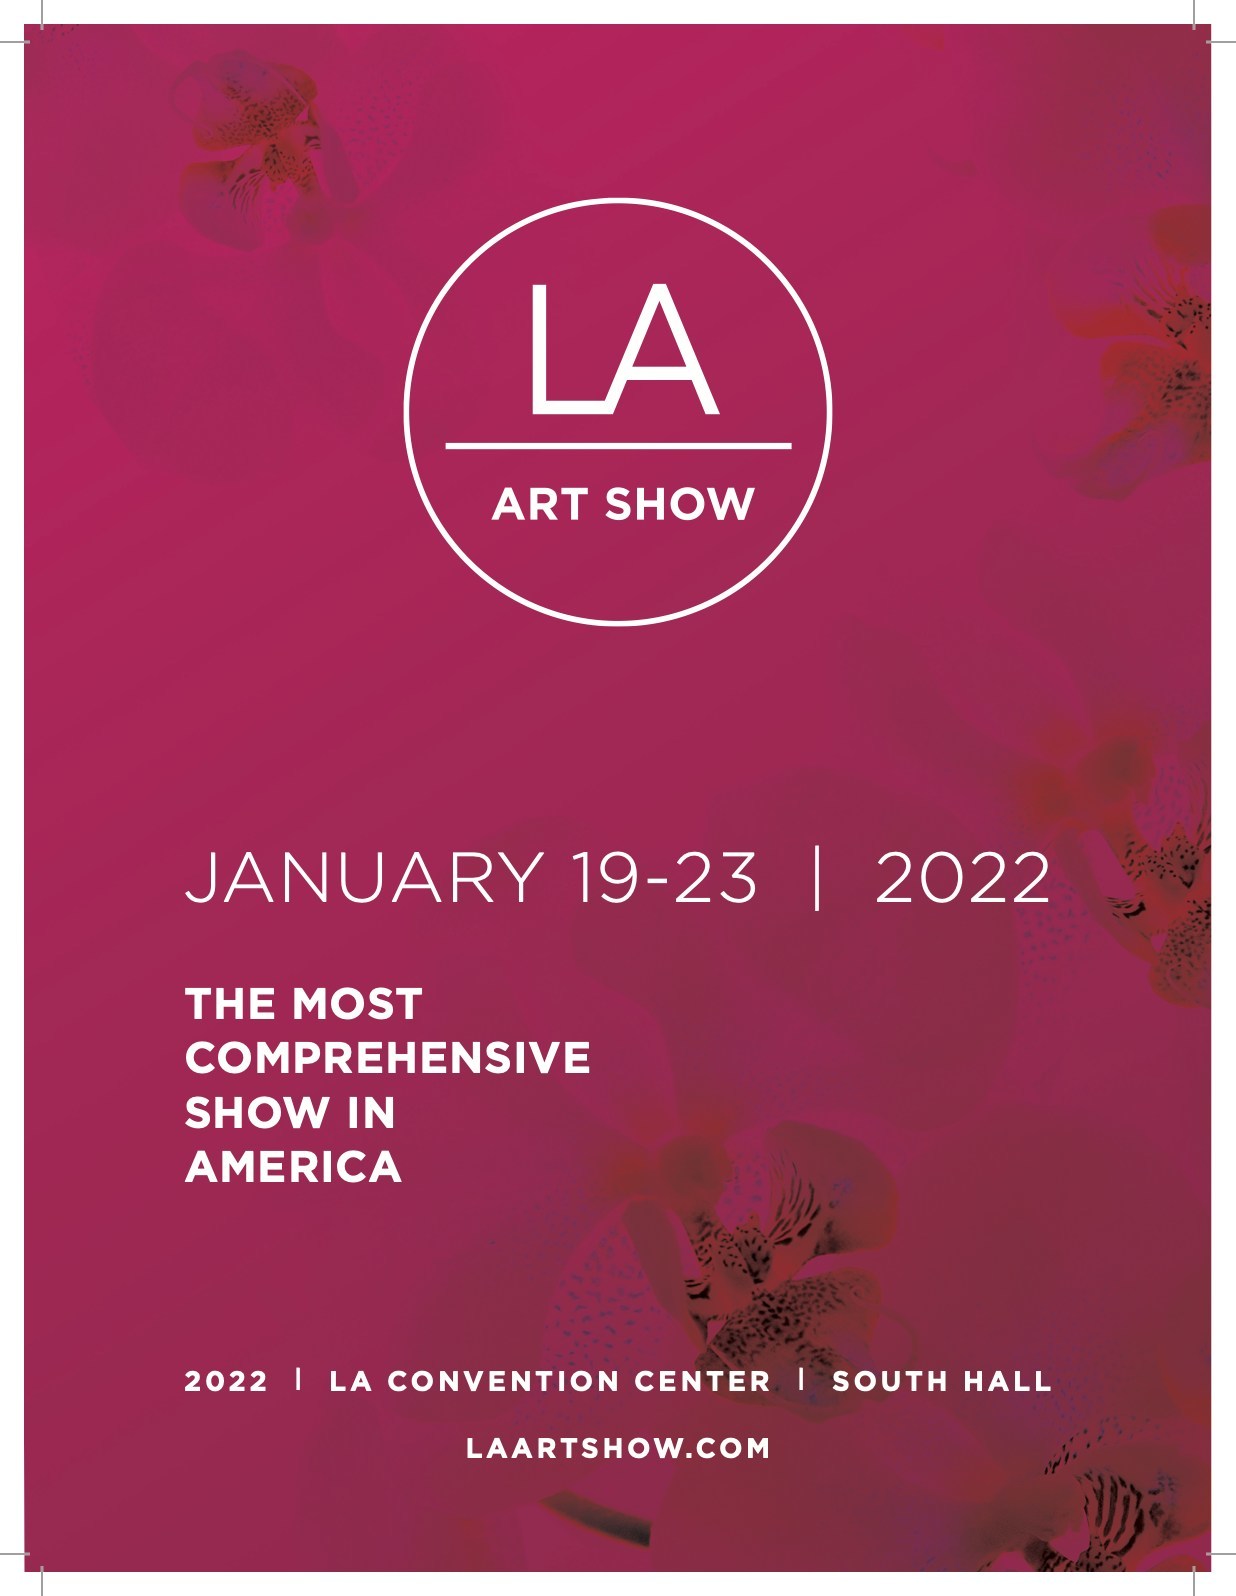 LA Art Show Returns in January Following Hugely Successful Special